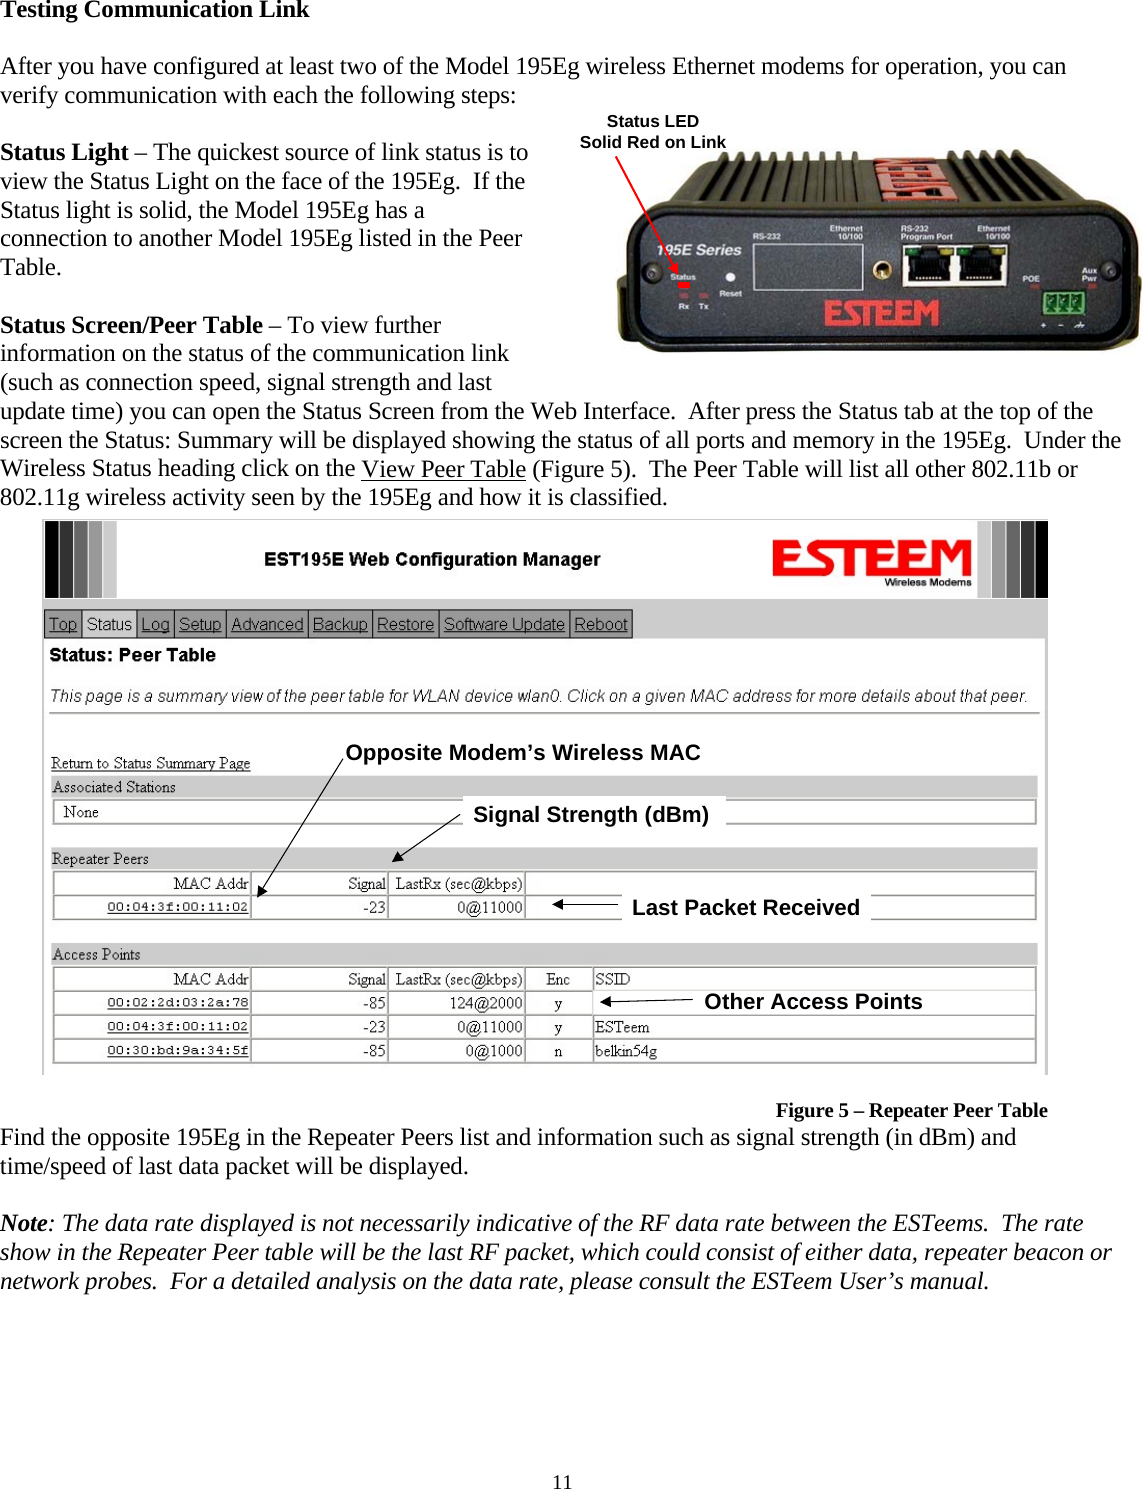 Testing Communication Link  After you have configured at least two of the Model 195Eg wireless Ethernet modems for operation, you can verify communication with each the following steps:  11 Status Light – The quickest source of link status is to view the Status Light on the face of the 195Eg.  If the Status light is solid, the Model 195Eg has a connection to another Model 195Eg listed in the Peer Table.  Status Screen/Peer Table – To view further information on the status of the communication link (such as connection speed, signal strength and last update time) you can open the Status Screen from the Web Interface.  After press the Status tab at the top of the screen the Status: Summary will be displayed showing the status of all ports and memory in the 195Eg.  Under the Wireless Status heading click on the View Peer Table (Figure 5).  The Peer Table will list all other 802.11b or 802.11g wireless activity seen by the 195Eg and how it is classified.   Status LEDSolid Red on Link  Find the opposite 195Eg in the Repeater Peers list and information such as signal strength (in dBm) and time/speed of last data packet will be displayed. Opposite Modem’s Wireless MACOther Access PointsSignal Strength (dBm) Last Packet Received  Figure 5 – Repeater Peer Table  Note: The data rate displayed is not necessarily indicative of the RF data rate between the ESTeems.  The rate show in the Repeater Peer table will be the last RF packet, which could consist of either data, repeater beacon or network probes.  For a detailed analysis on the data rate, please consult the ESTeem User’s manual.  